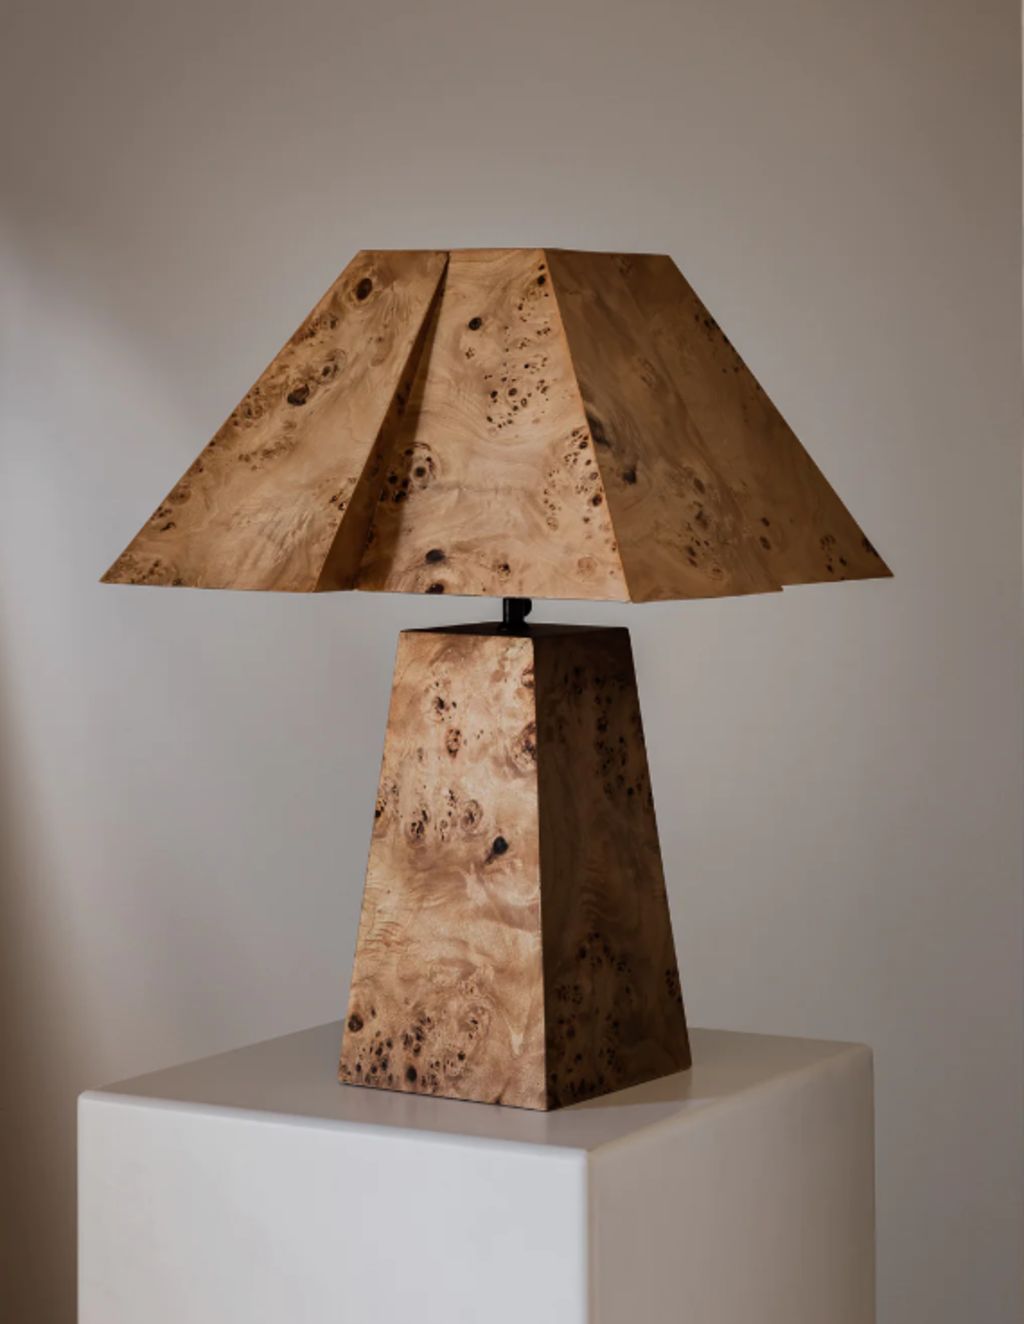 Burl wood is back, baby. The Bohan lamp from Rachel Donath. Photo: Supplied